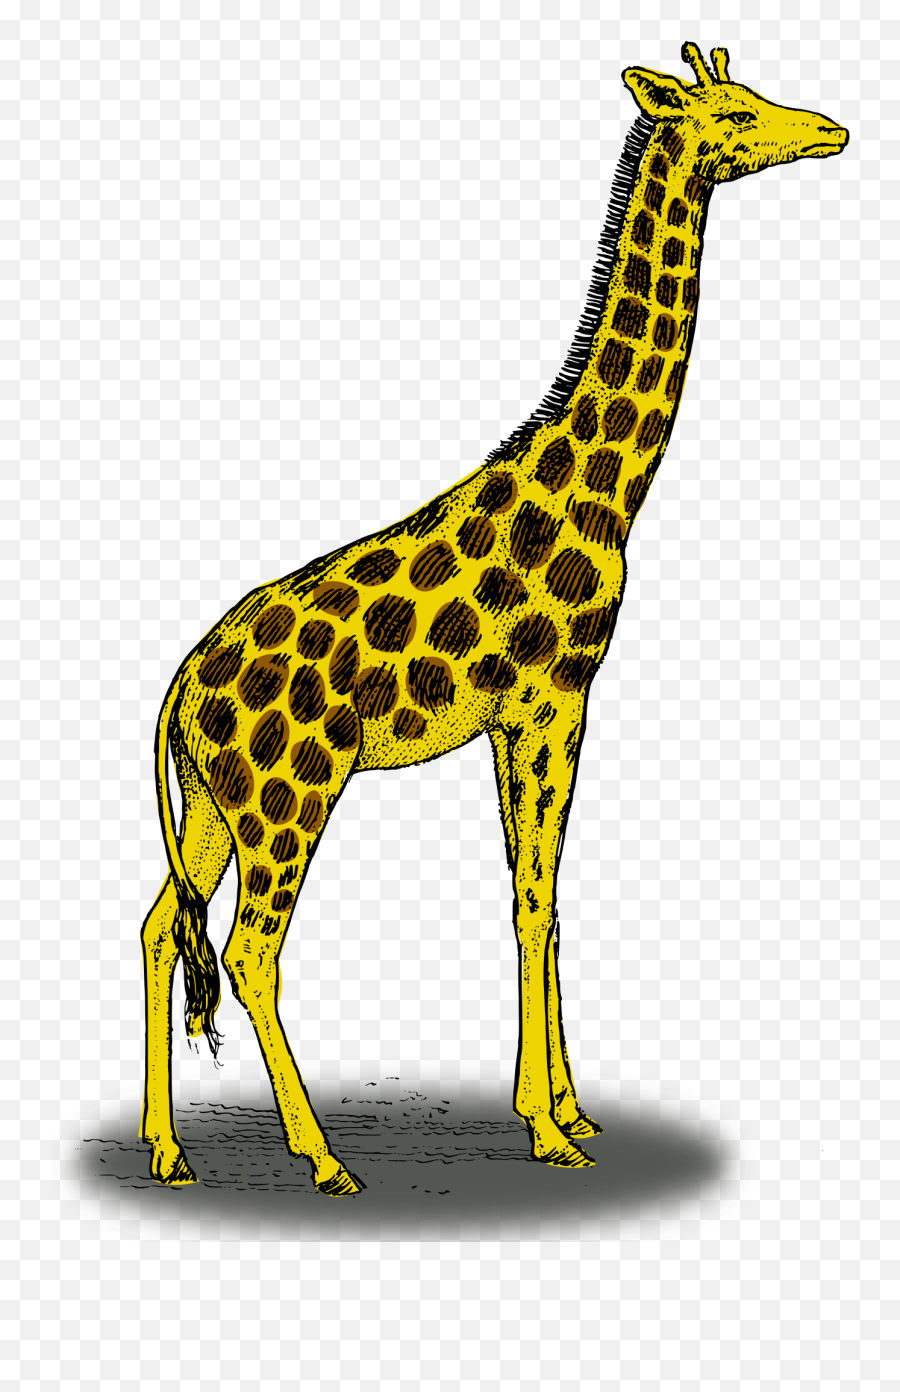 Colored Giraffe Png 900px Large Size - Clip Arts Free And Giraffe Colored,Giraffe Png